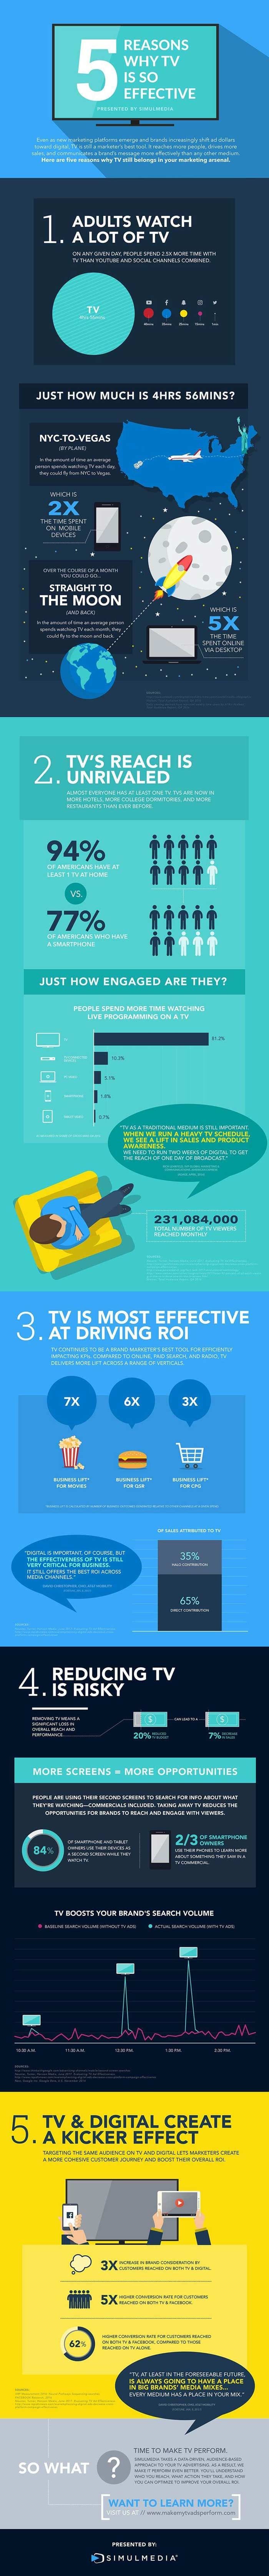 Infographic showing 5 reasons why TV advertising is so effective.